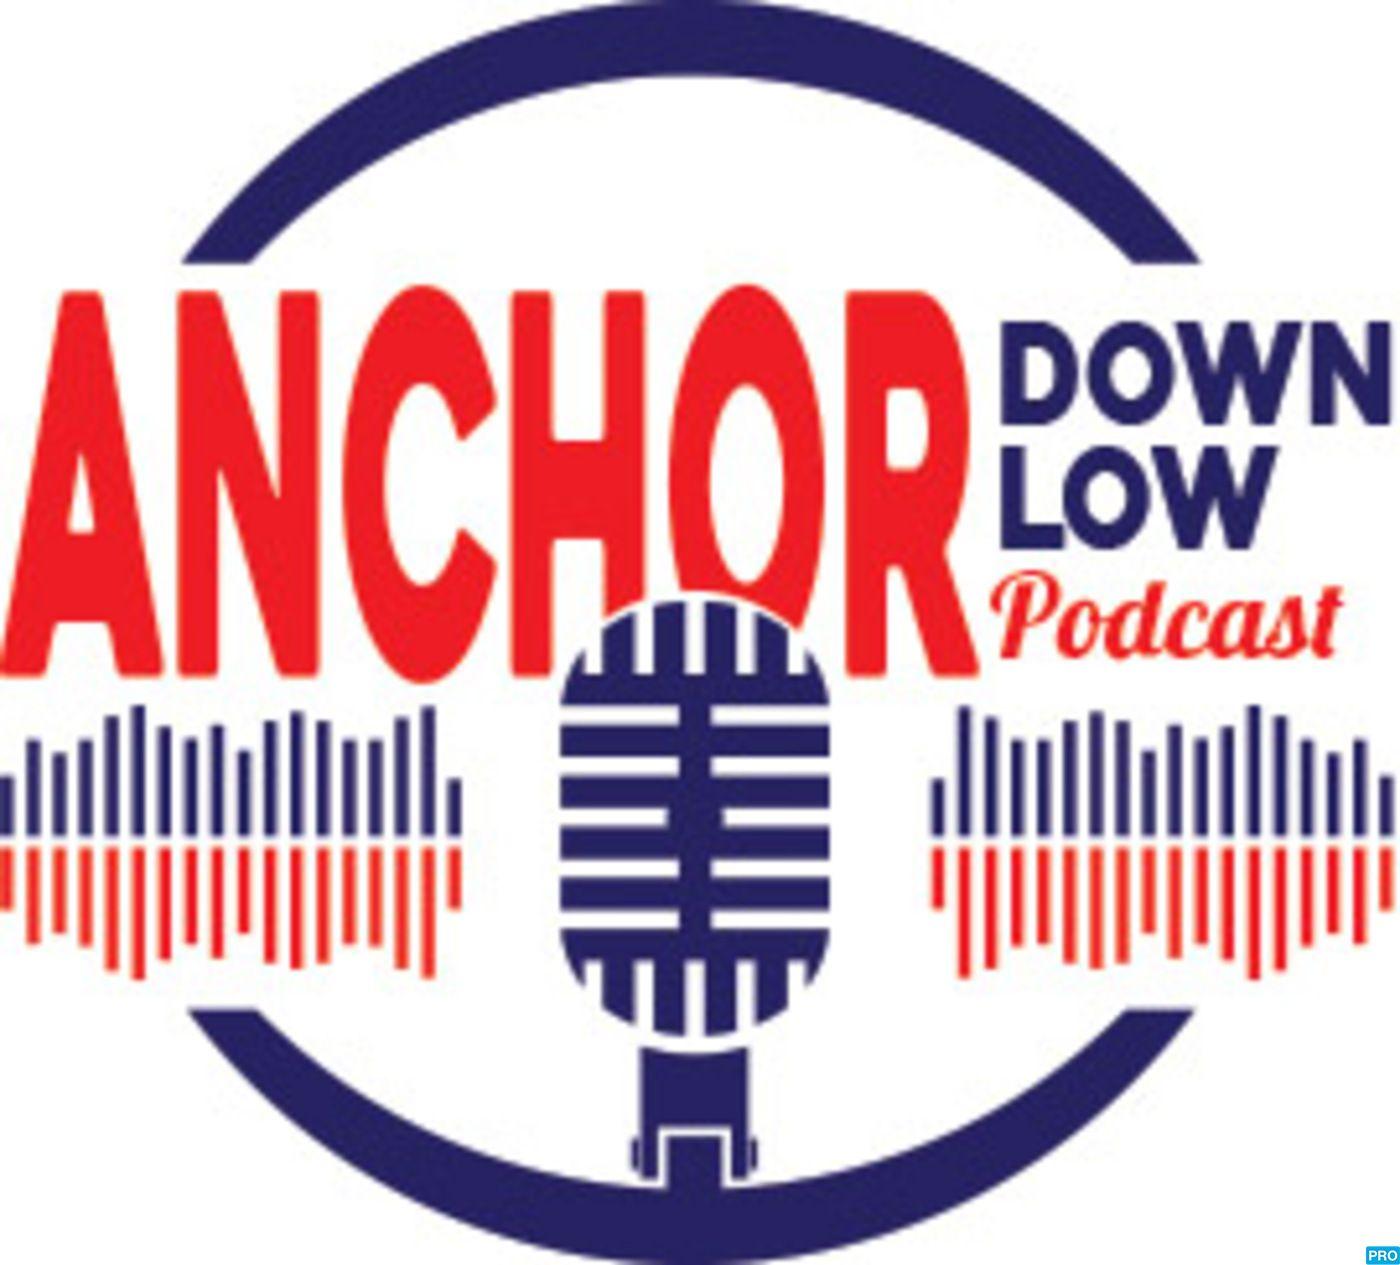 Anchor Down Logo - pod|fanatic | Podcast: The Anchor Down Low